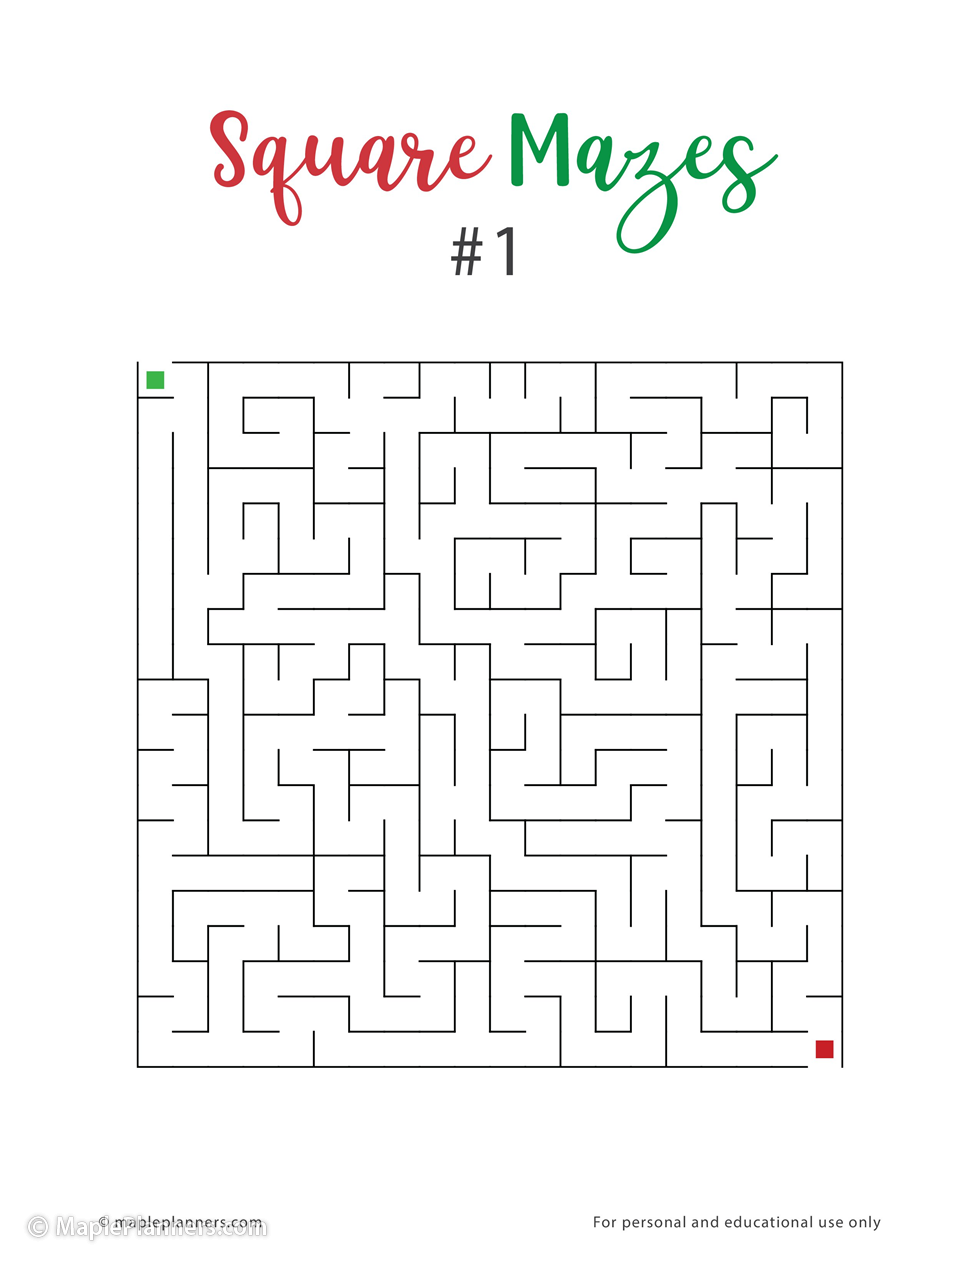 Grilled Cheese Mazes For Kids Age 4-6: 40 Brain-bending Challenges